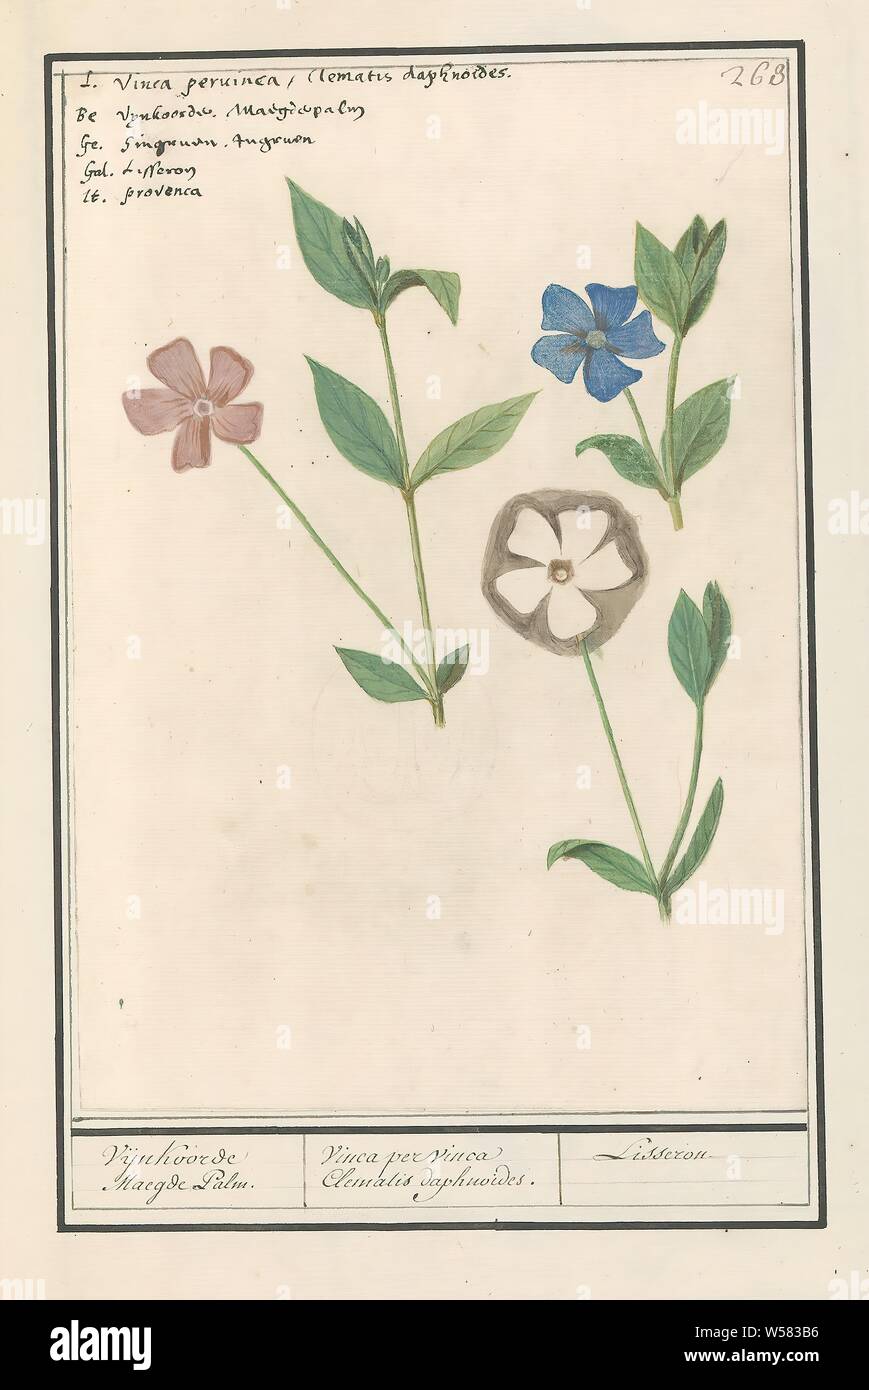 Periwinkle (Vinca) Vijnkoorde Maegde Palm. / Vinca per vinca Clematis daphnoides. / Lisseron (title on object), Periwinkle, in three colors. Numbered top right: 263. Top right the name in five languages. Part of the third album with drawings of flowers and plants. Tenth of twelve albums with drawings of animals, birds and plants known around 1600, commissioned by Emperor Rudolf II. With explanation in Dutch, Latin and French., Anselmus Boetius de Boodt, 1596 - 1610, paper, watercolor (paint), deck paint, chalk, ink, pen, h 246 mm × w 170 mm Stock Photo